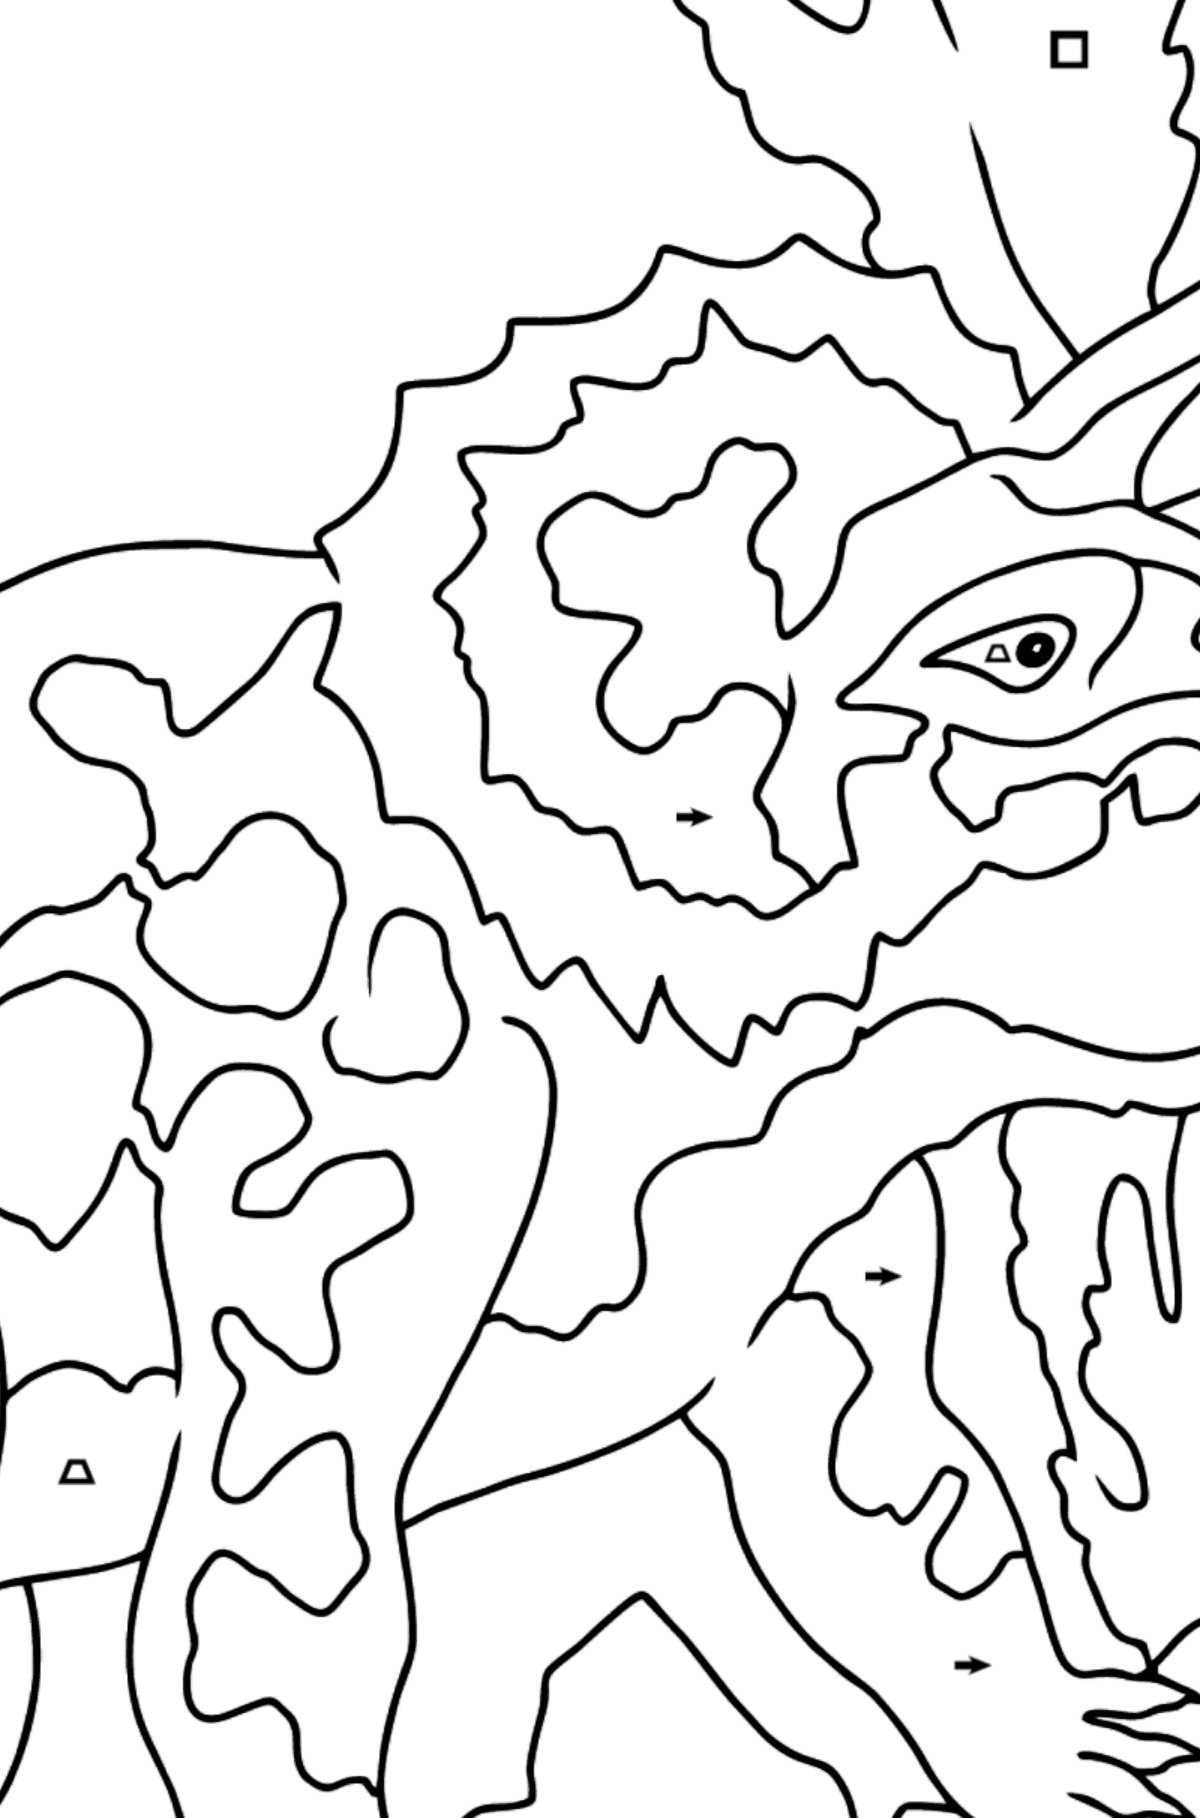 Triceratops Coloring Page - Coloring by Symbols and Geometric Shapes for Kids